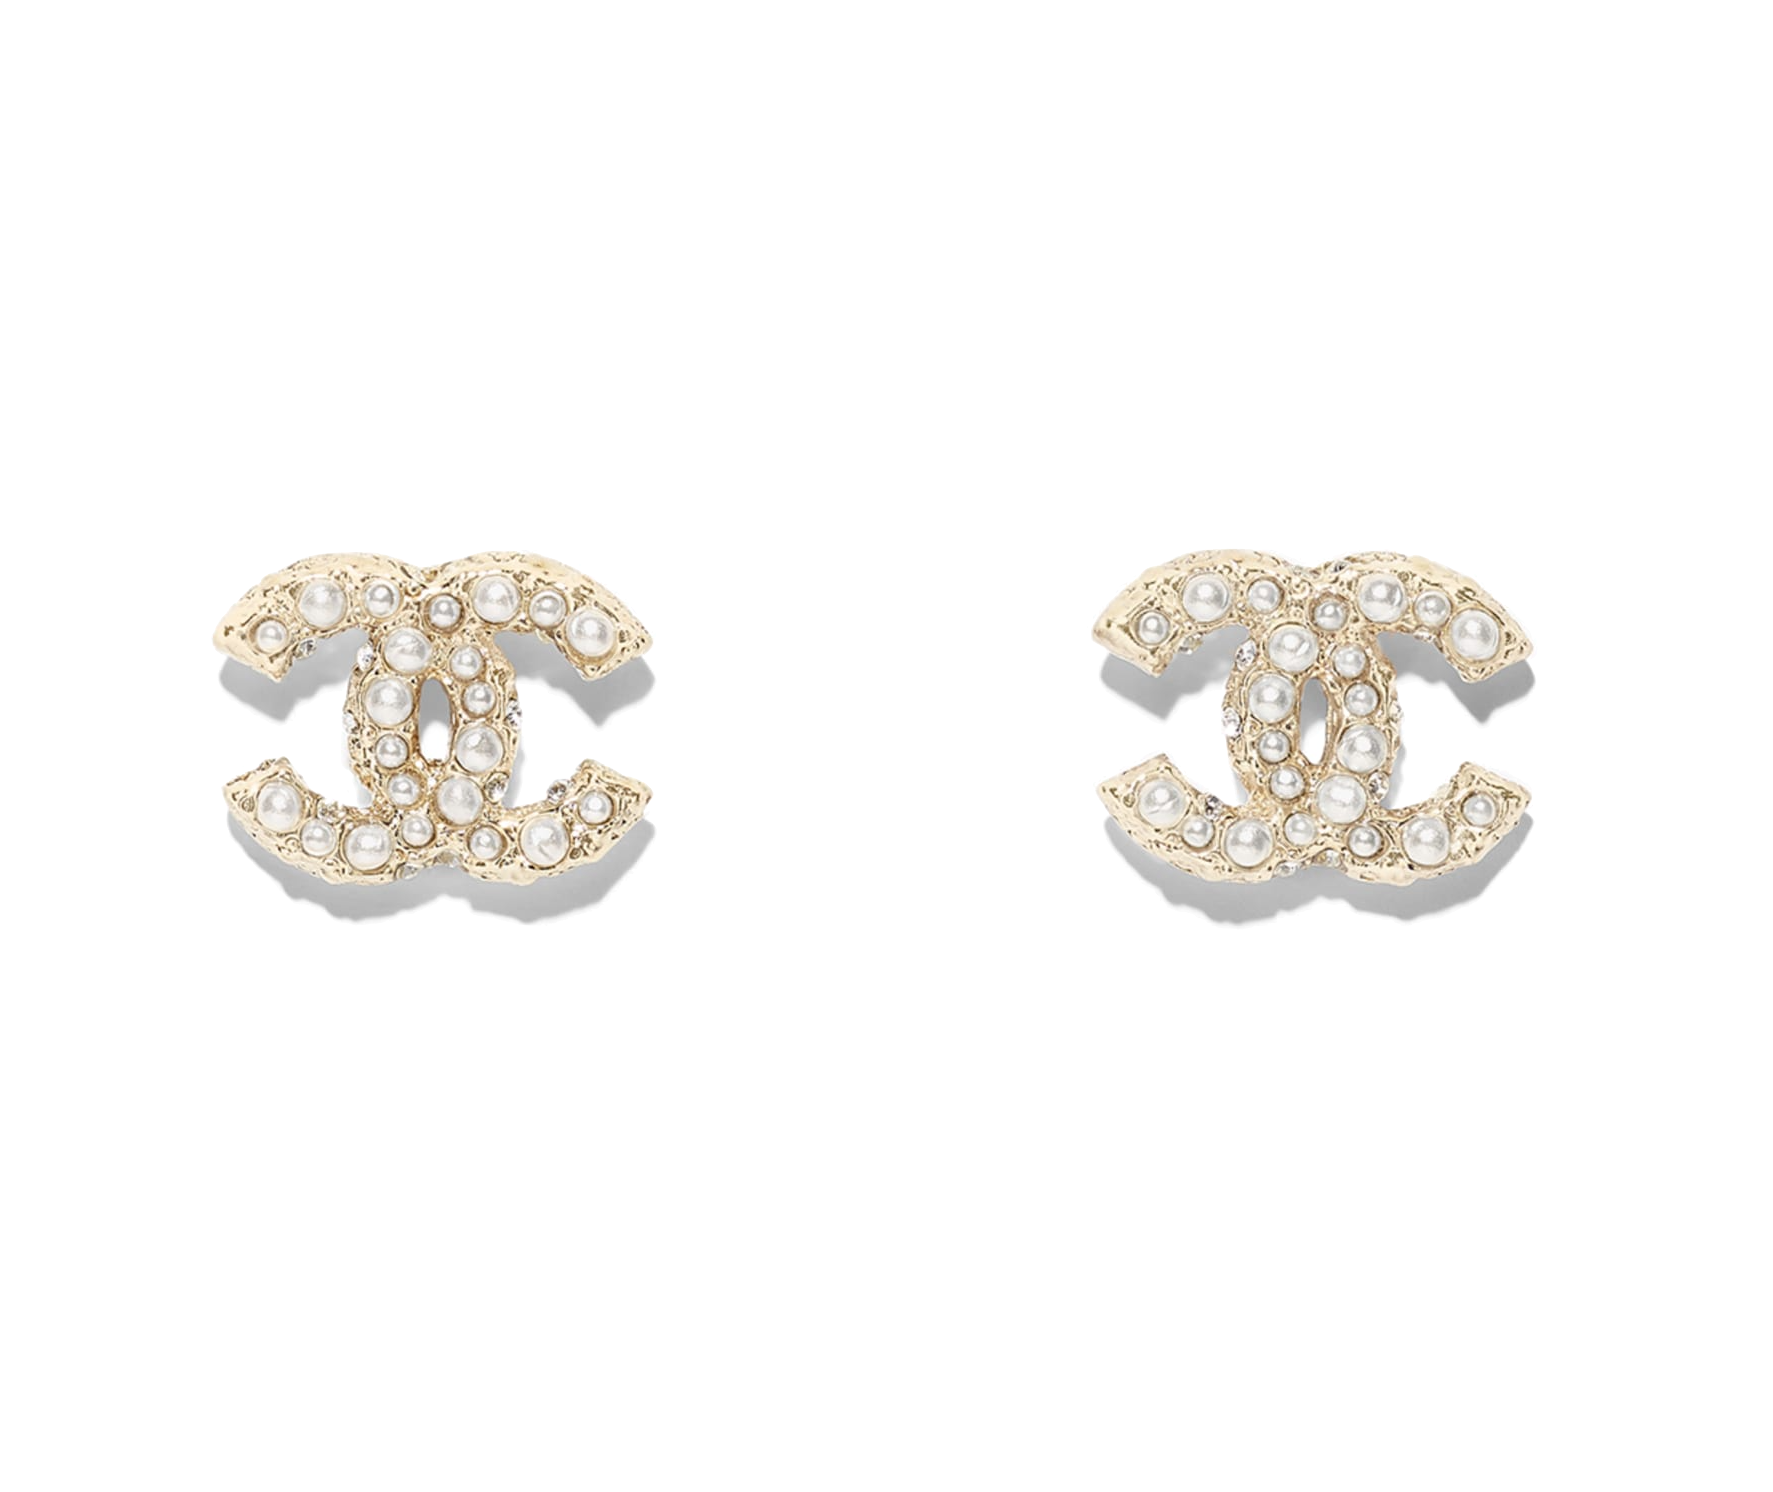 earrings-gold-pearly-white-metal-strass-resin-metal-strass-resin-packshot-default-a64766y09530z2048-8806040403998.png